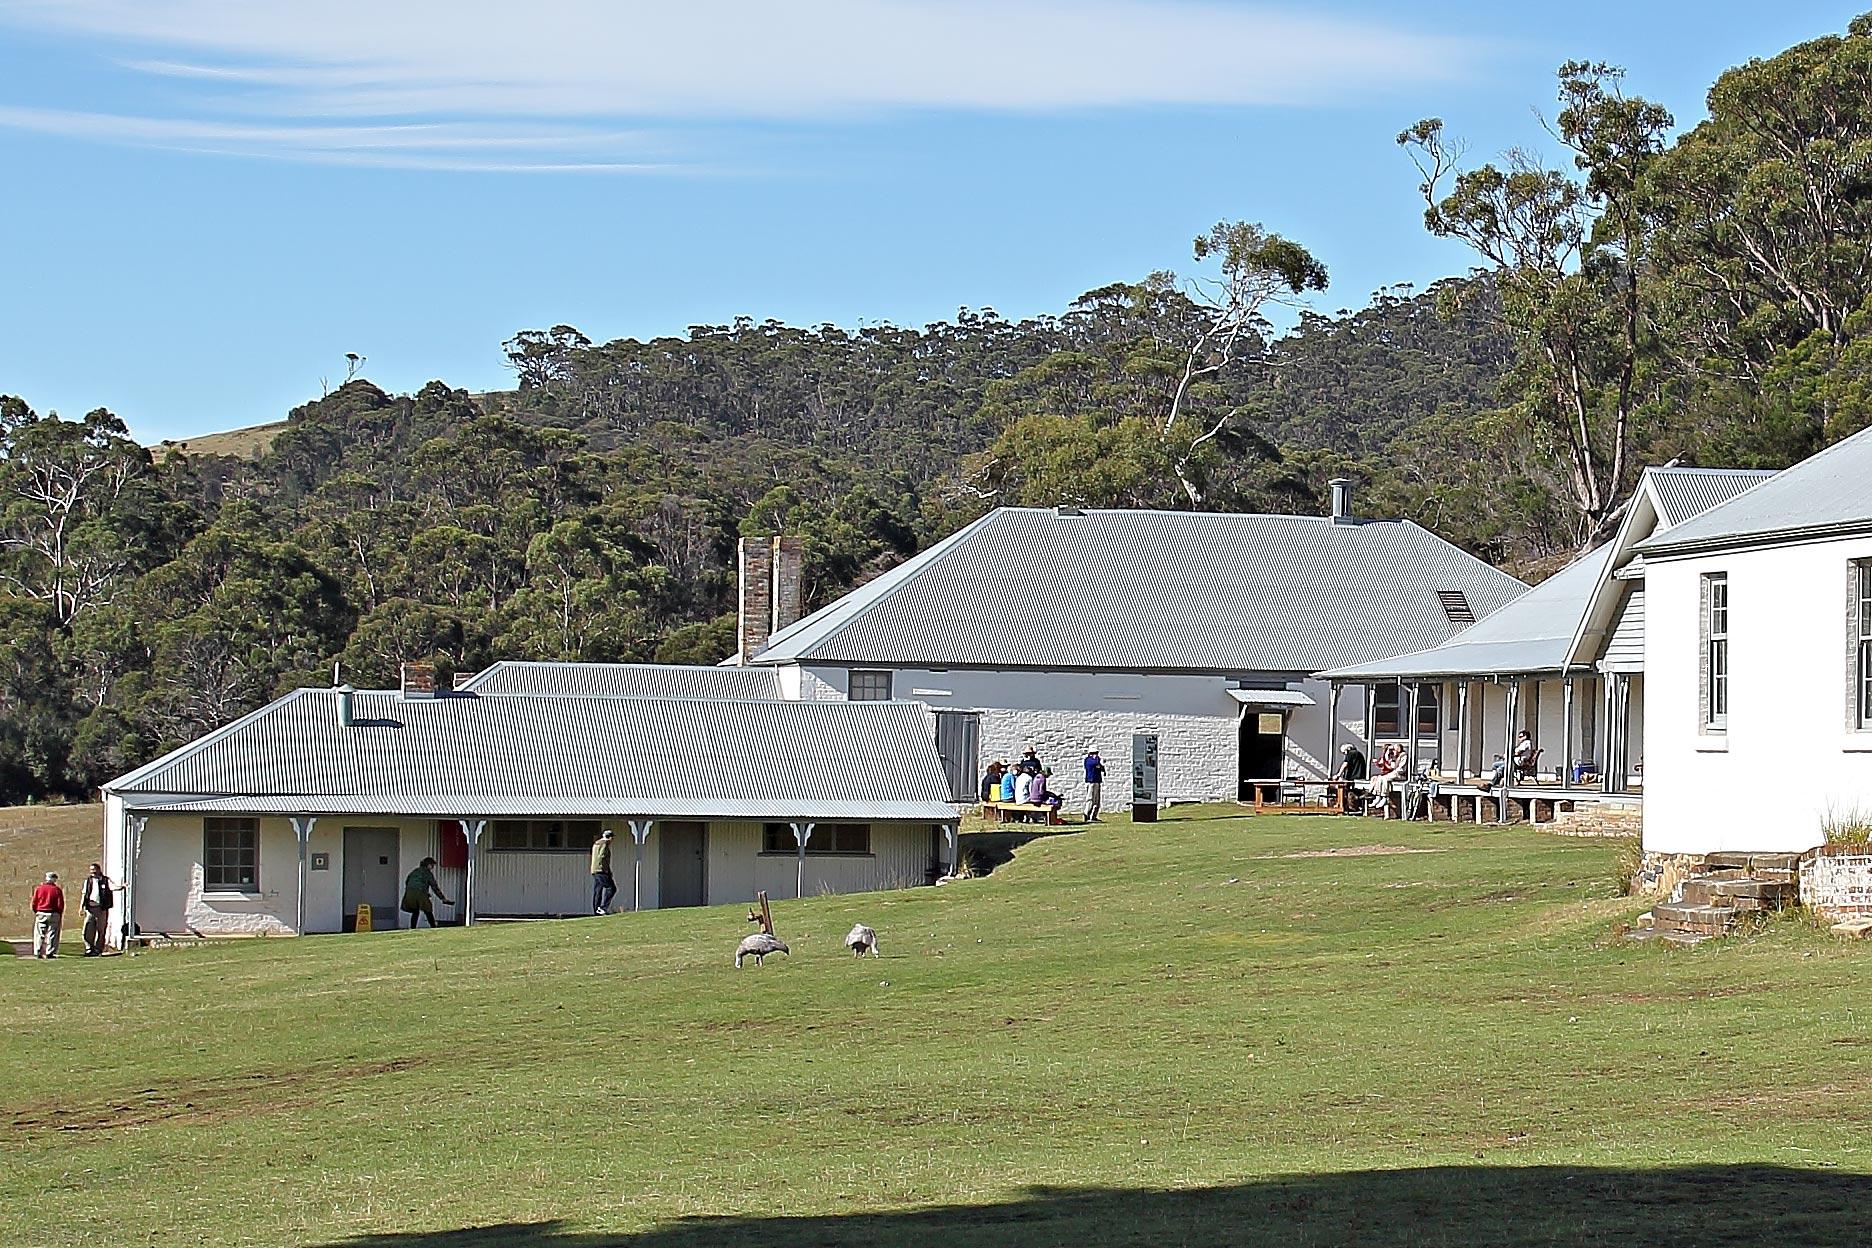 Maria Island’s Mess Hall used to house 400 convicts